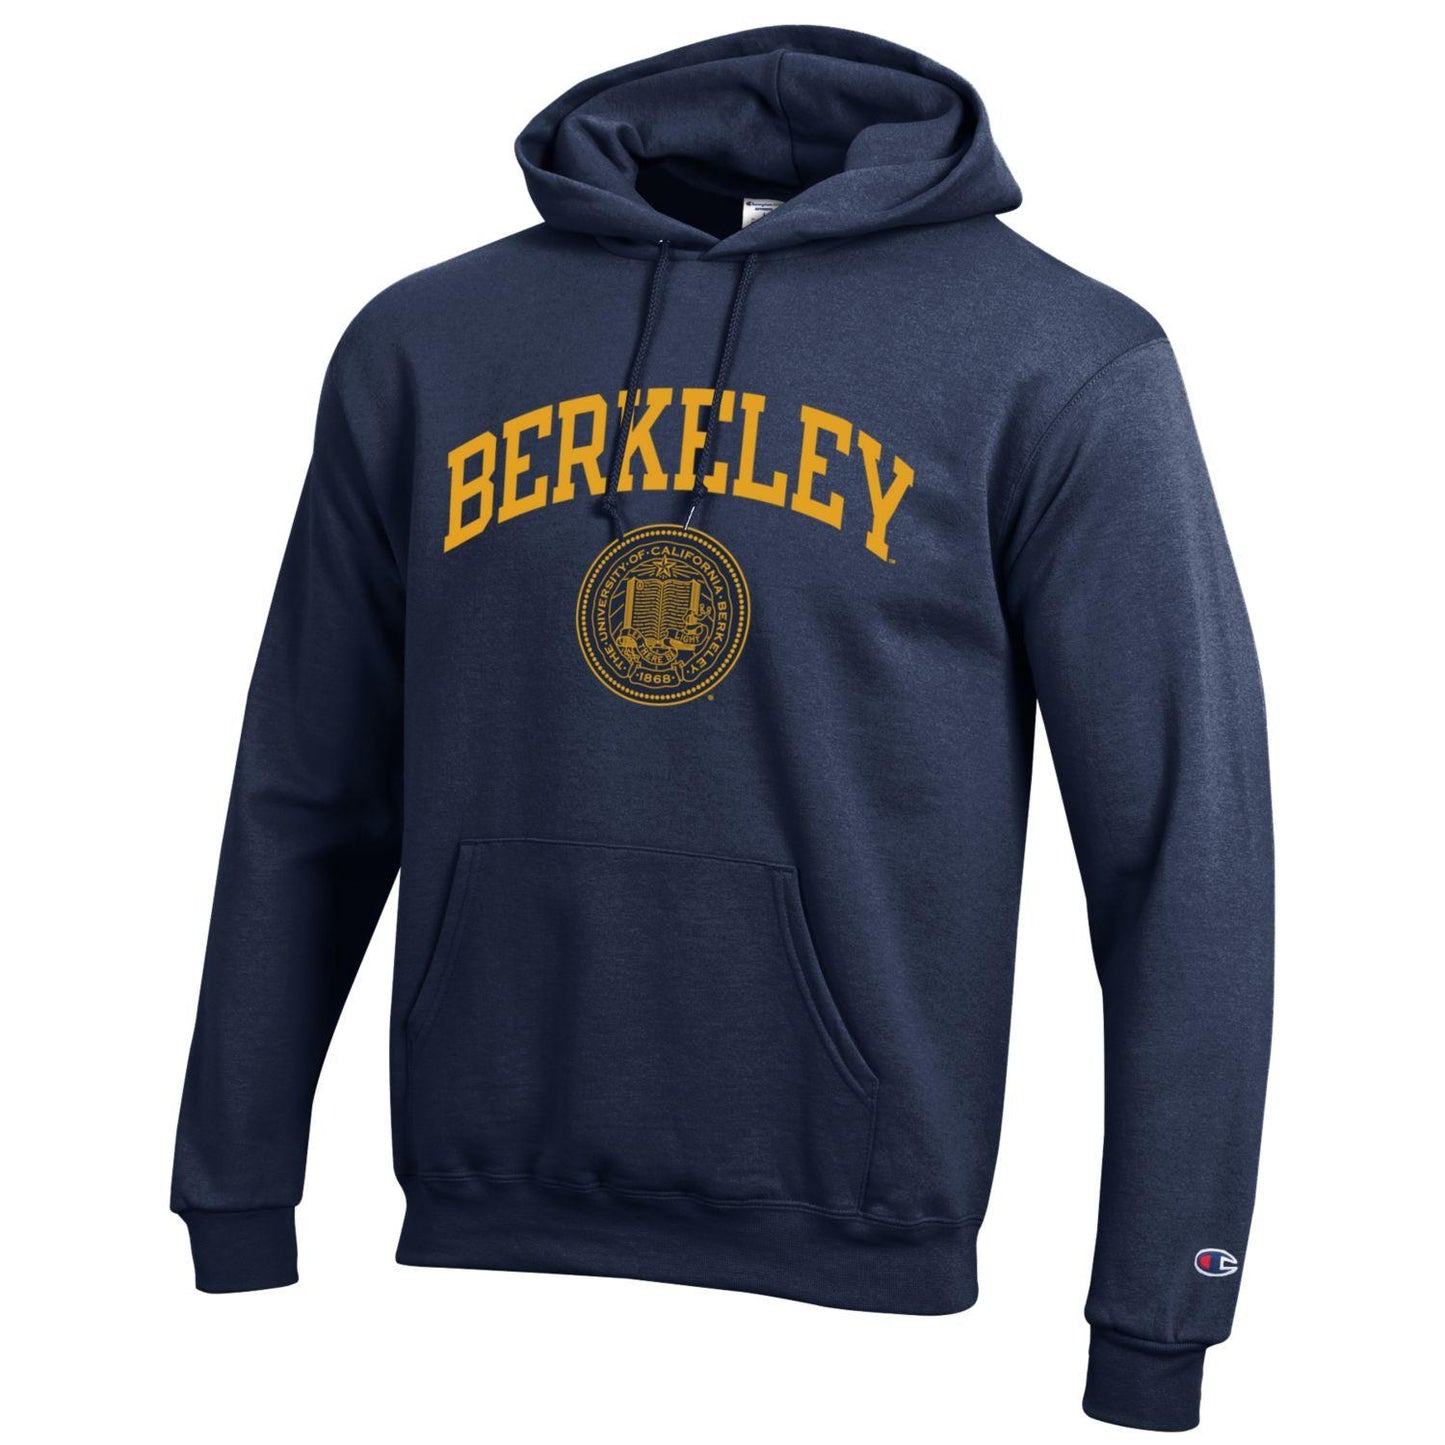 University of California Berkeley Sweats seal Shop College – Champion hoodie and Wear arch